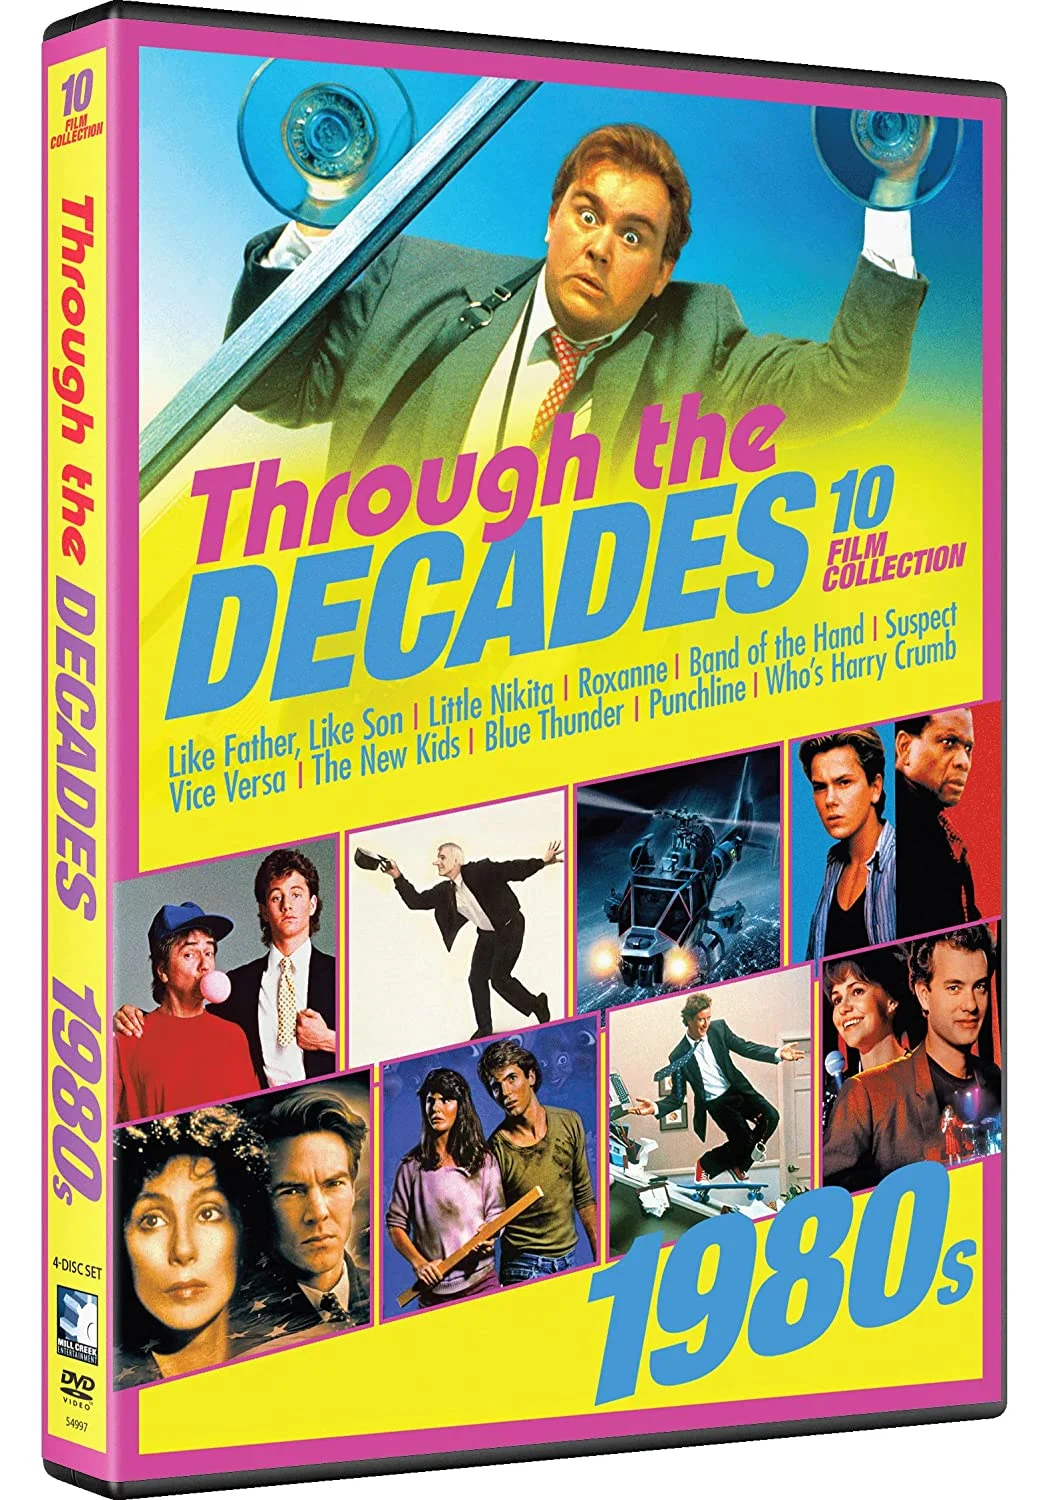 Through the Decades: 1980’s Collection (DVD) on MovieShack